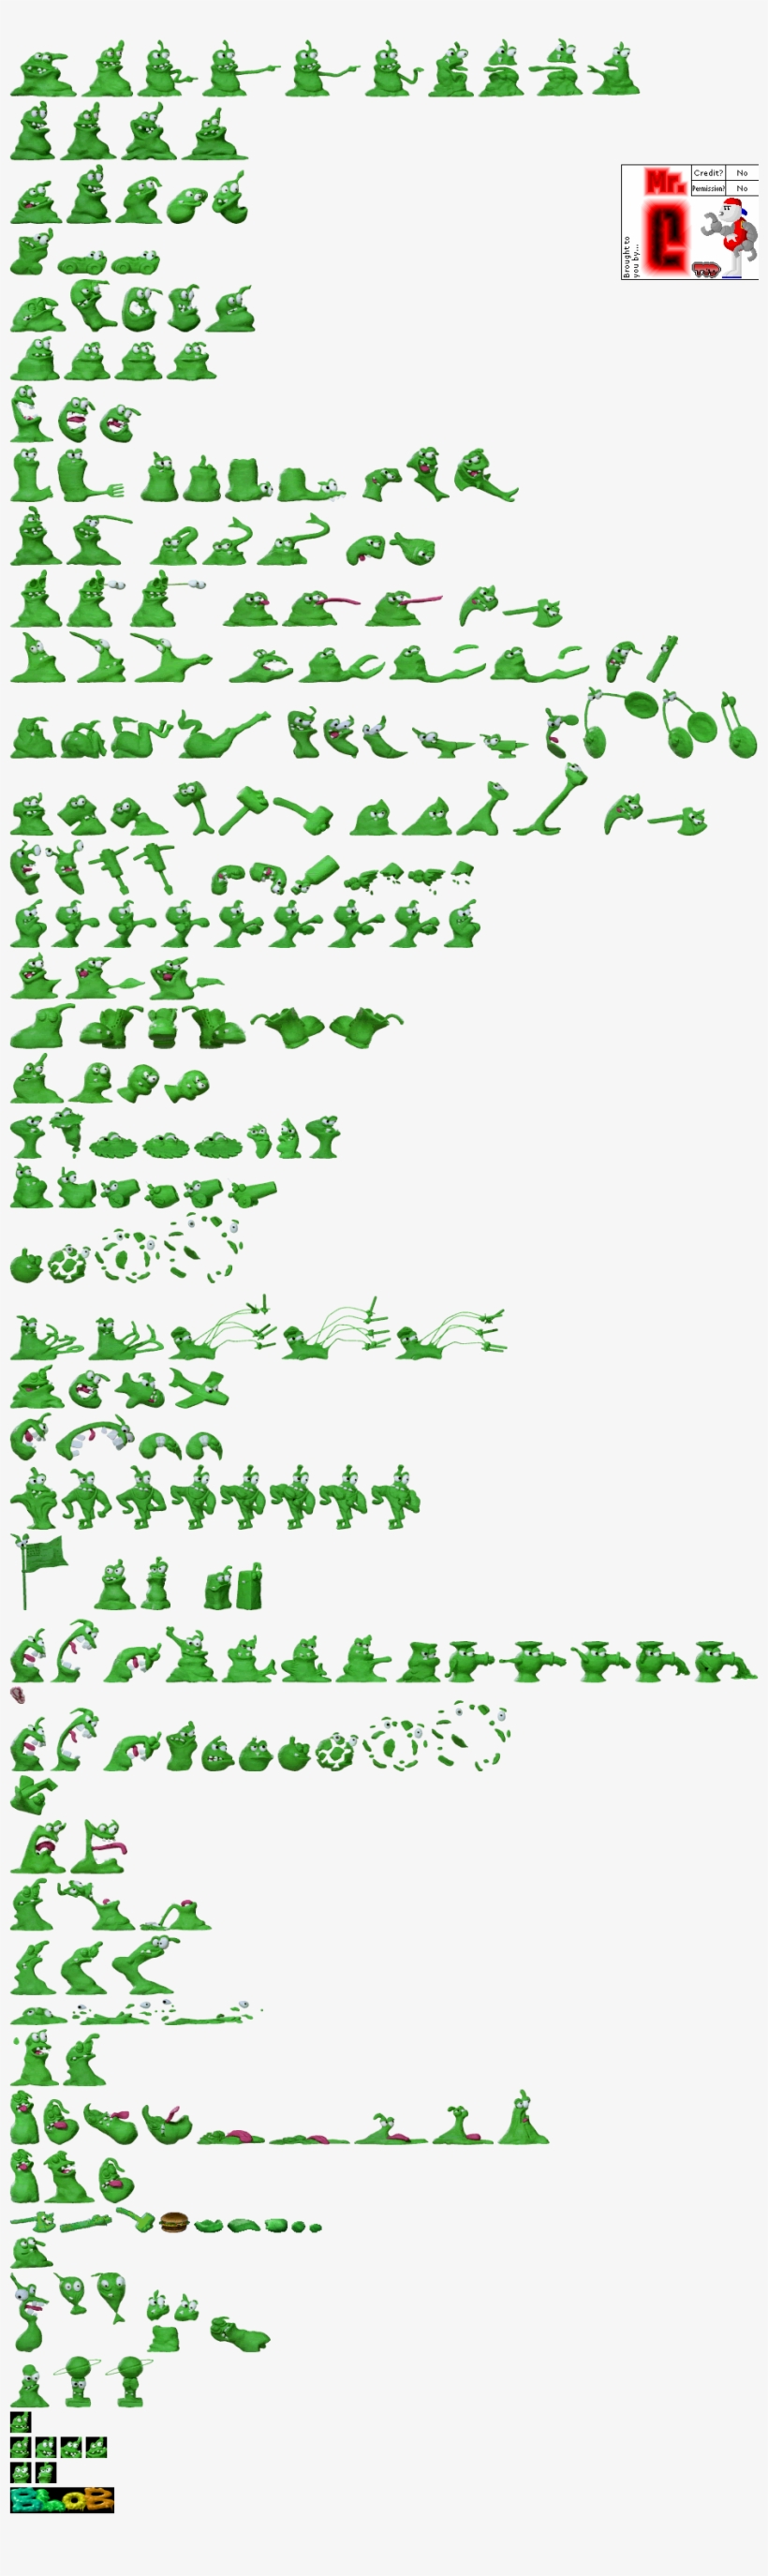 Click For Full Sized Image Blob - Clayfighter 63 1 3 Sprites, transparent png #8289193